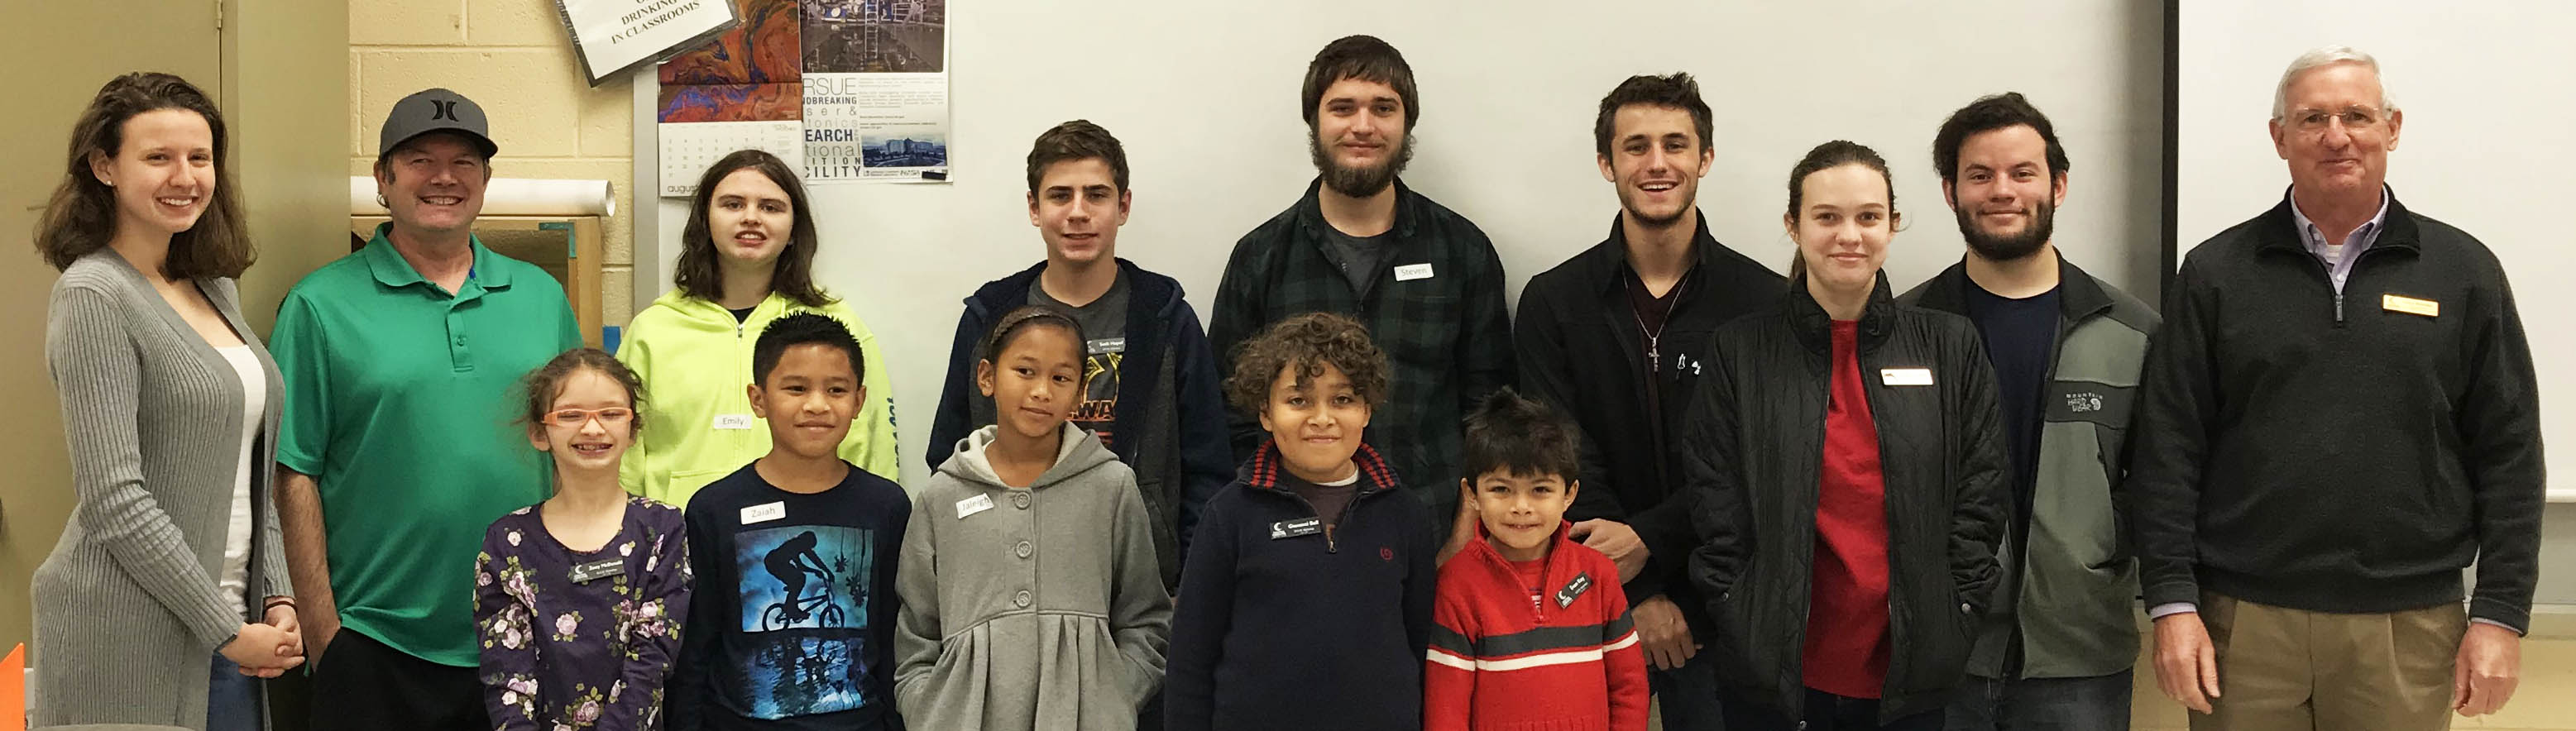 CCCC hosts youth lasers workshop